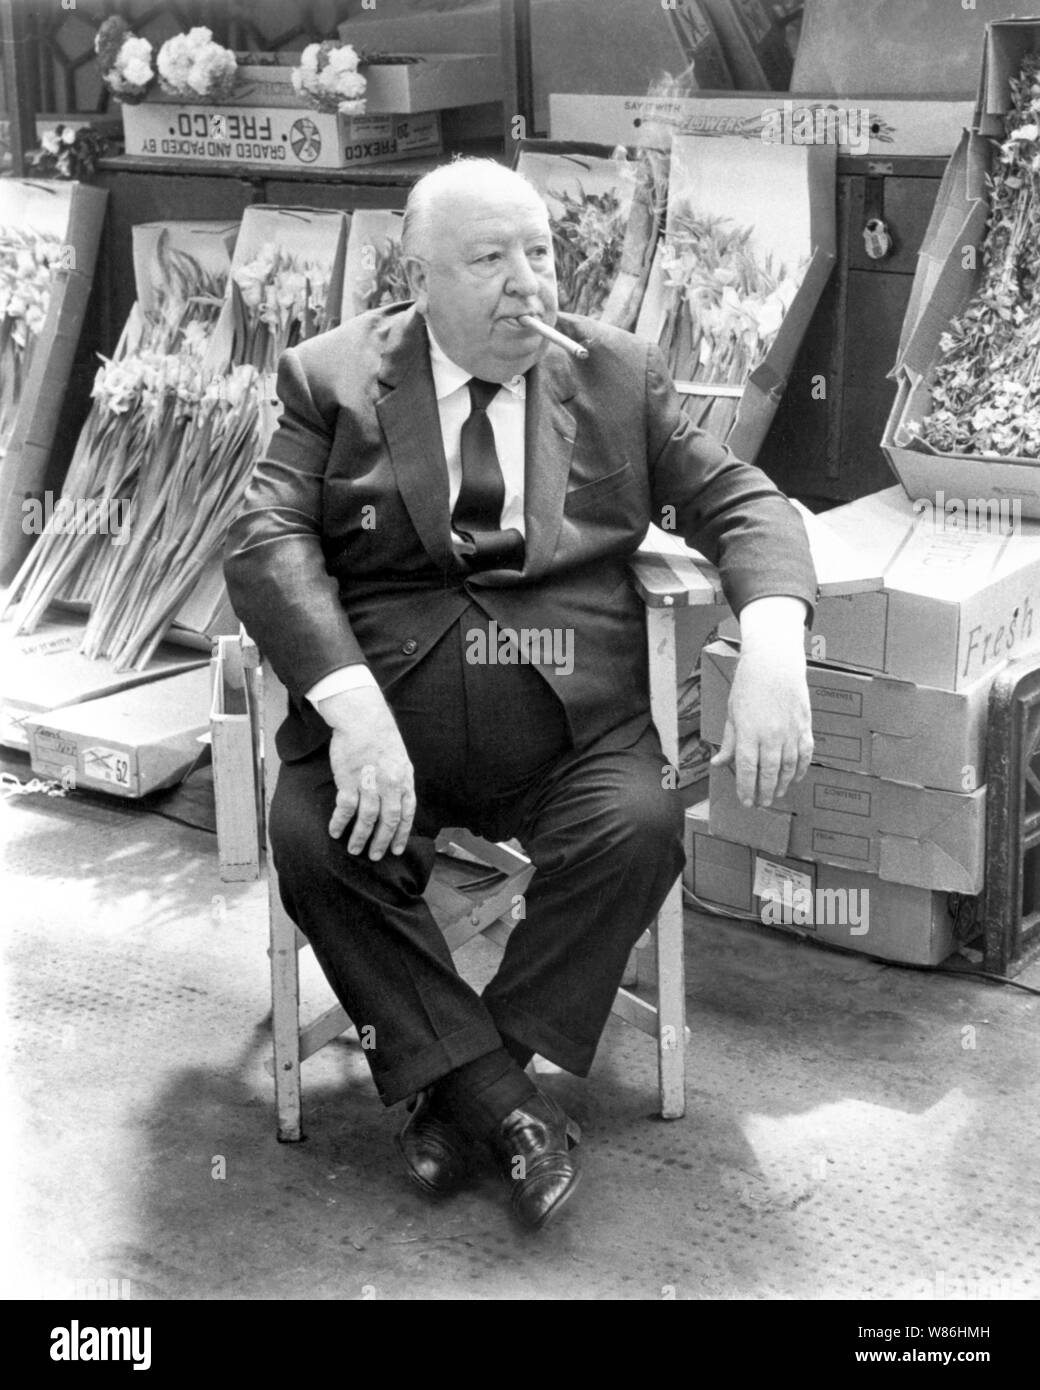 ALFRED HITCHCOCK in FRENZY (1972), directed by ALFRED HITCHCOCK. Credit: UNIVERSAL PICTURES / Album Stock Photo